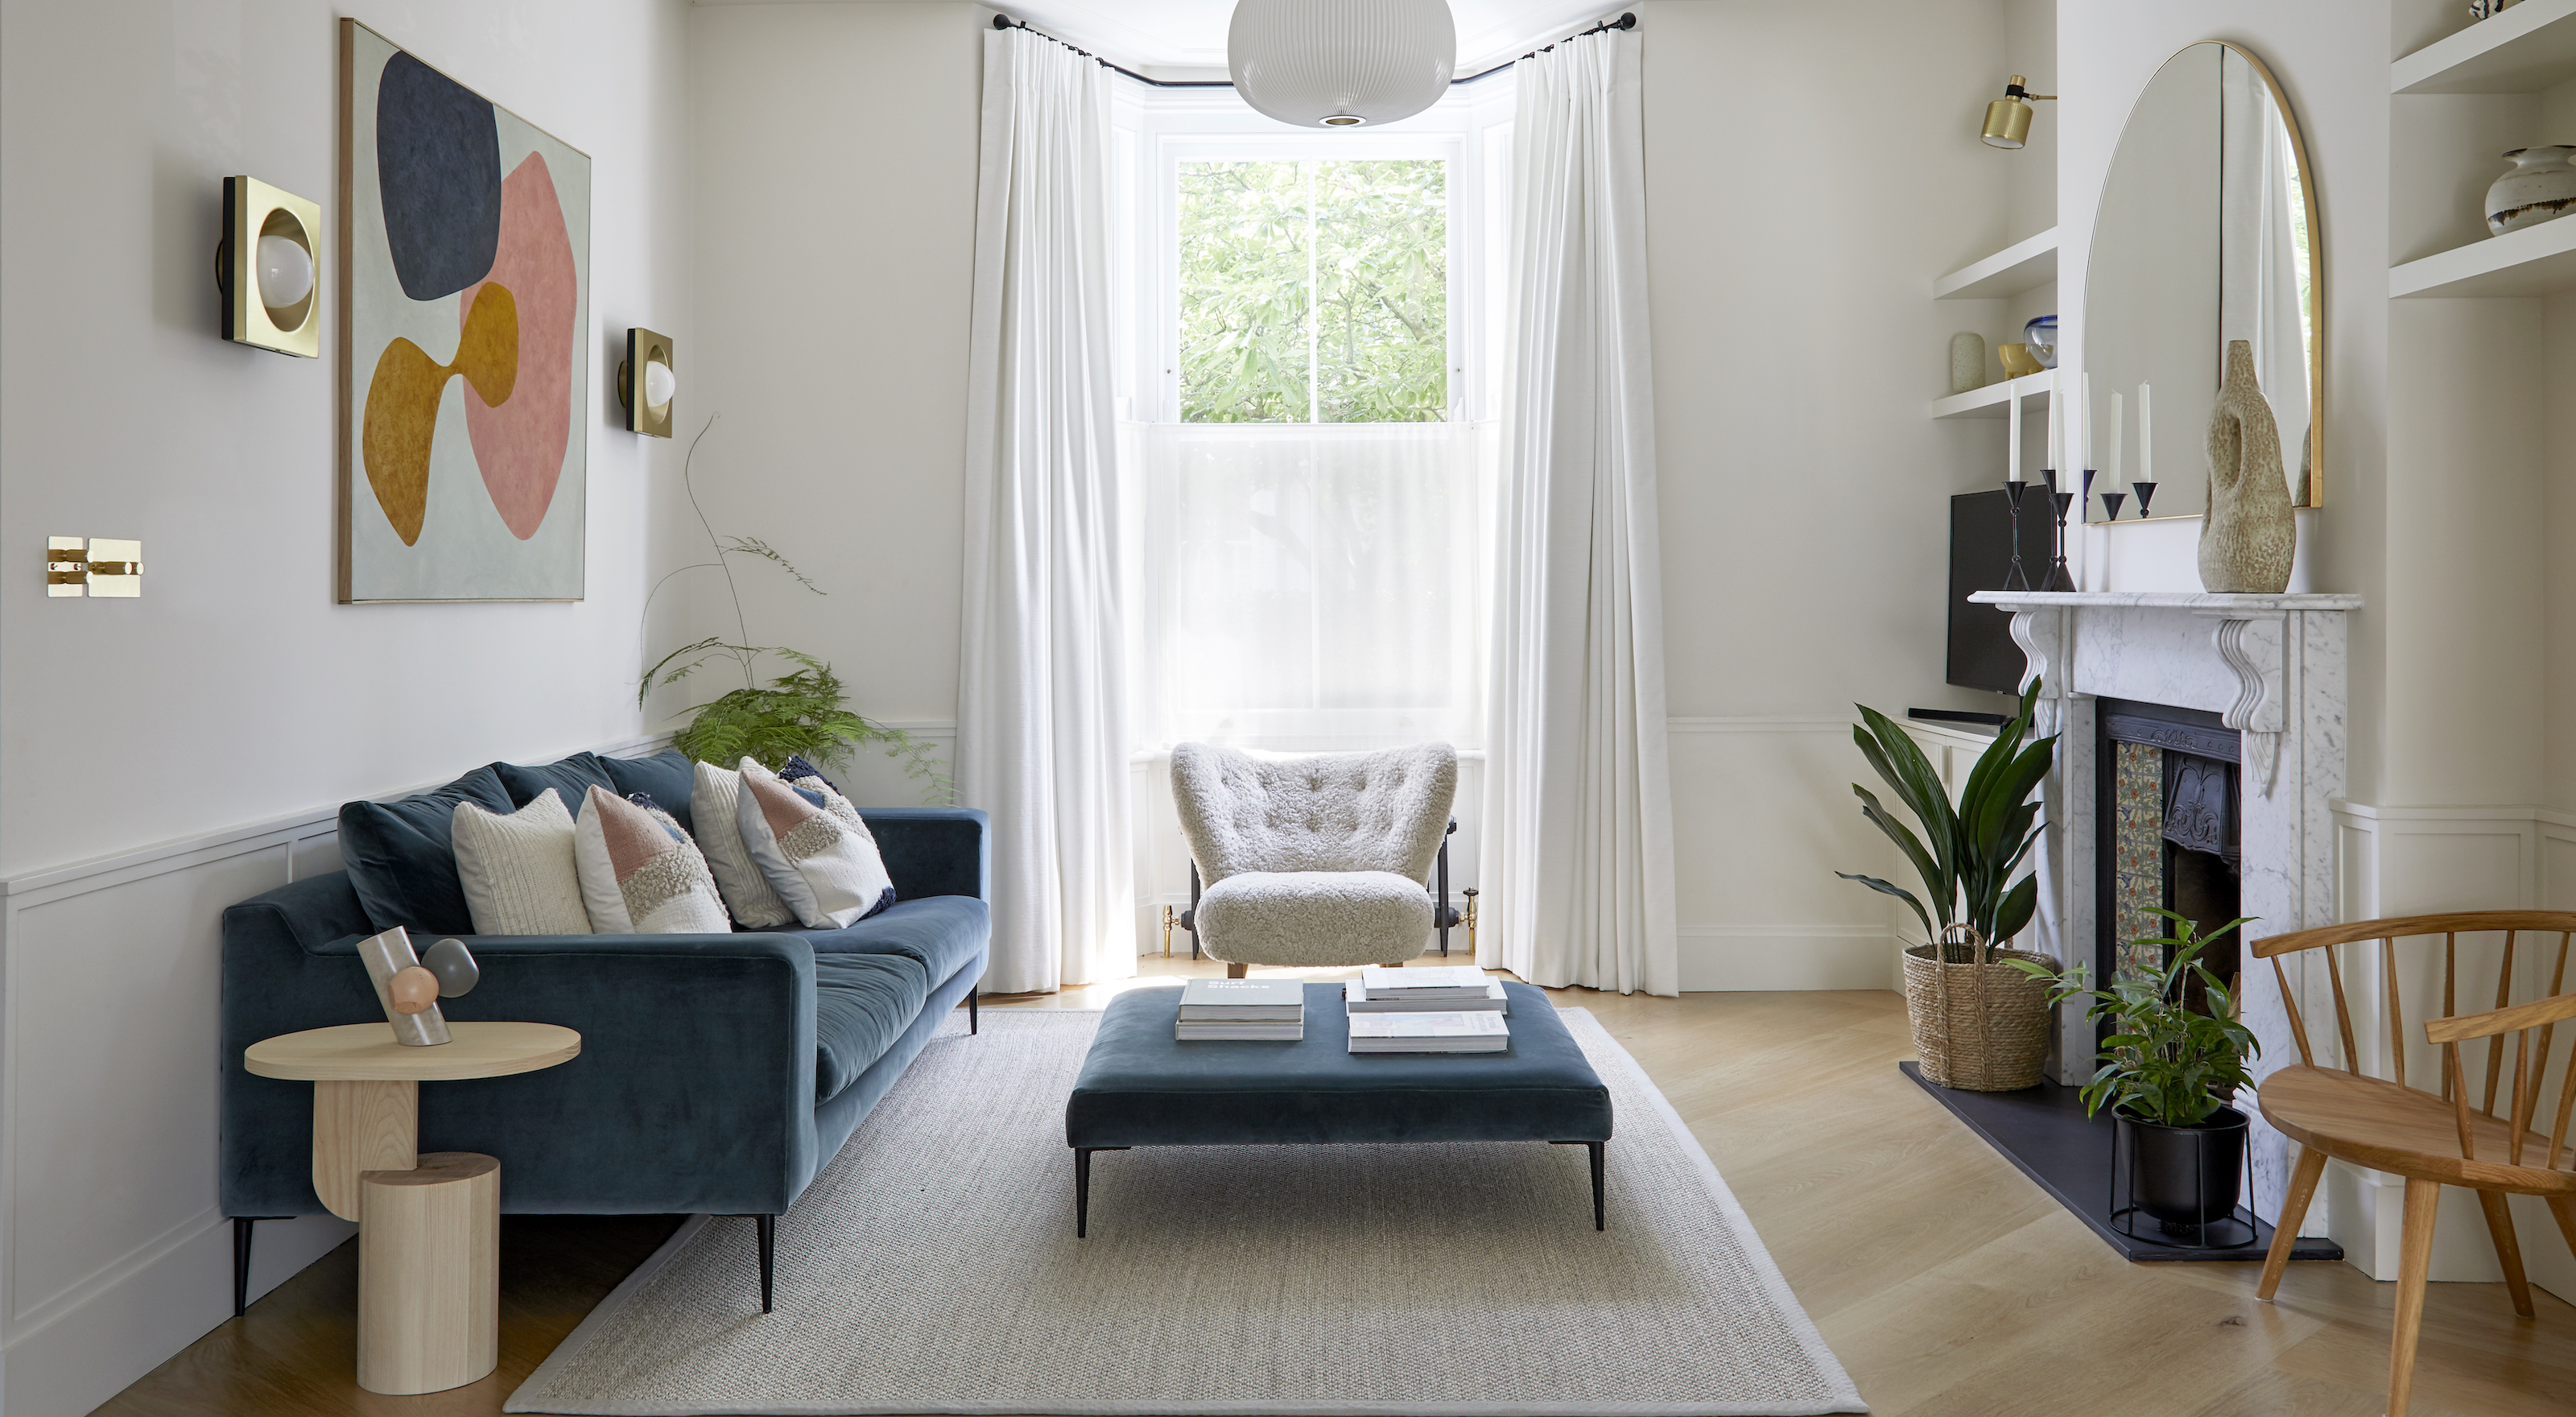 How can you add extra seats to a small living room?